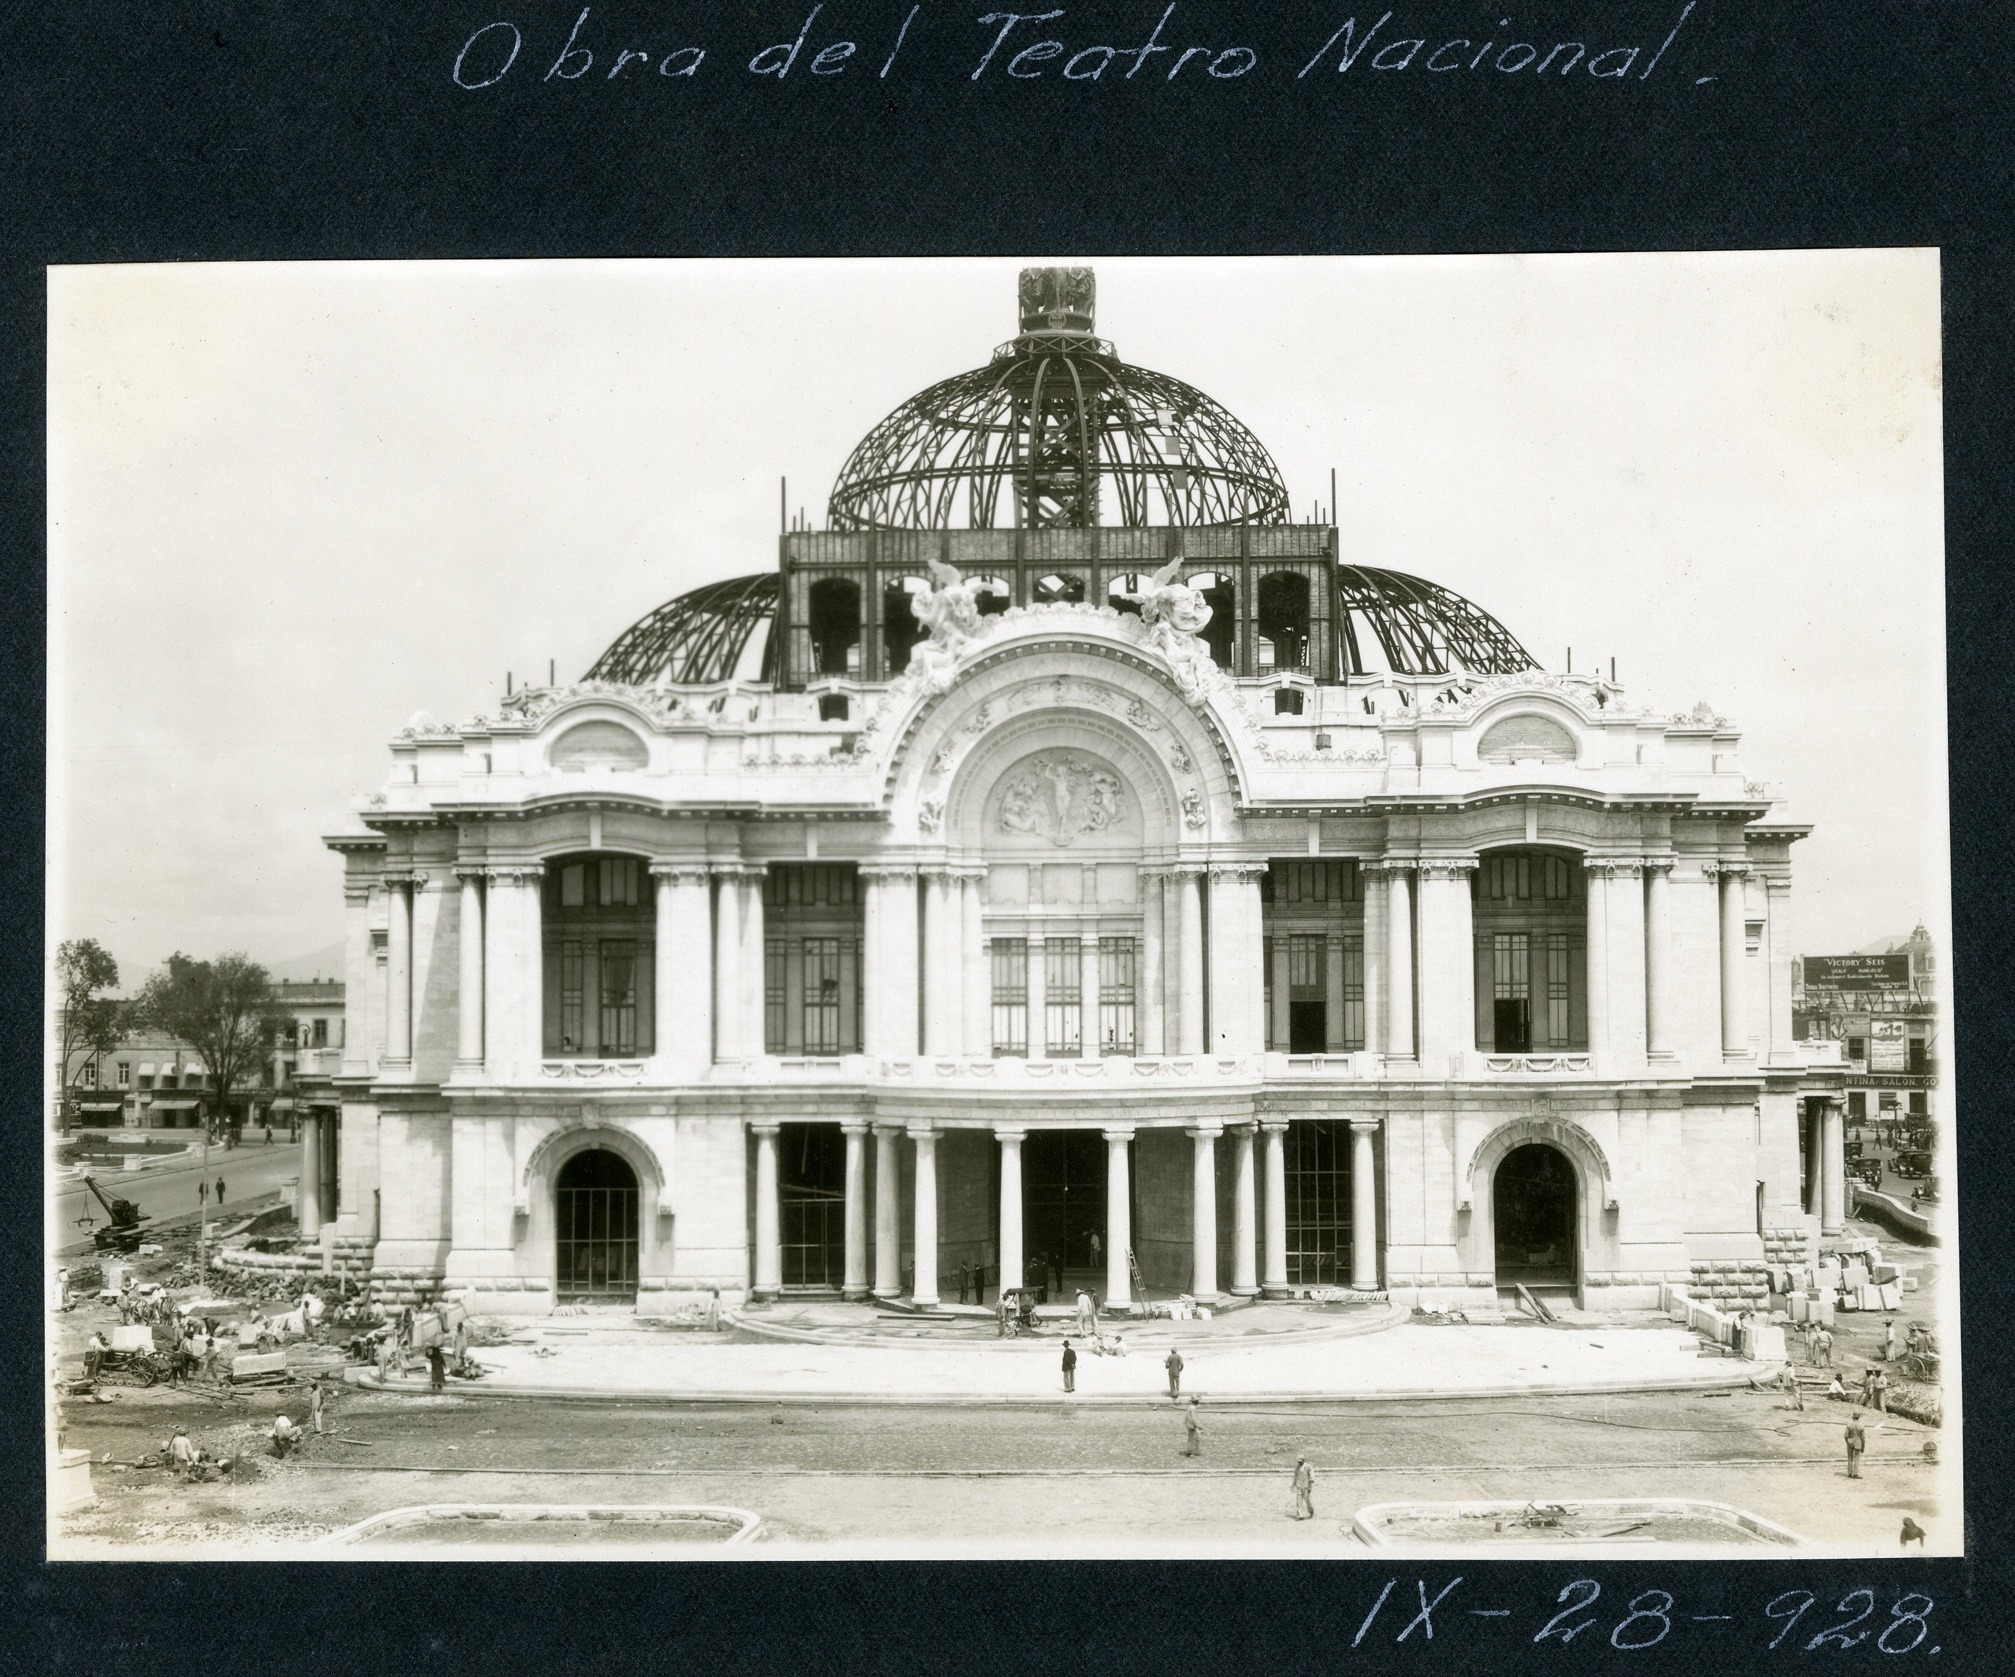 The building during its construction, 1928.